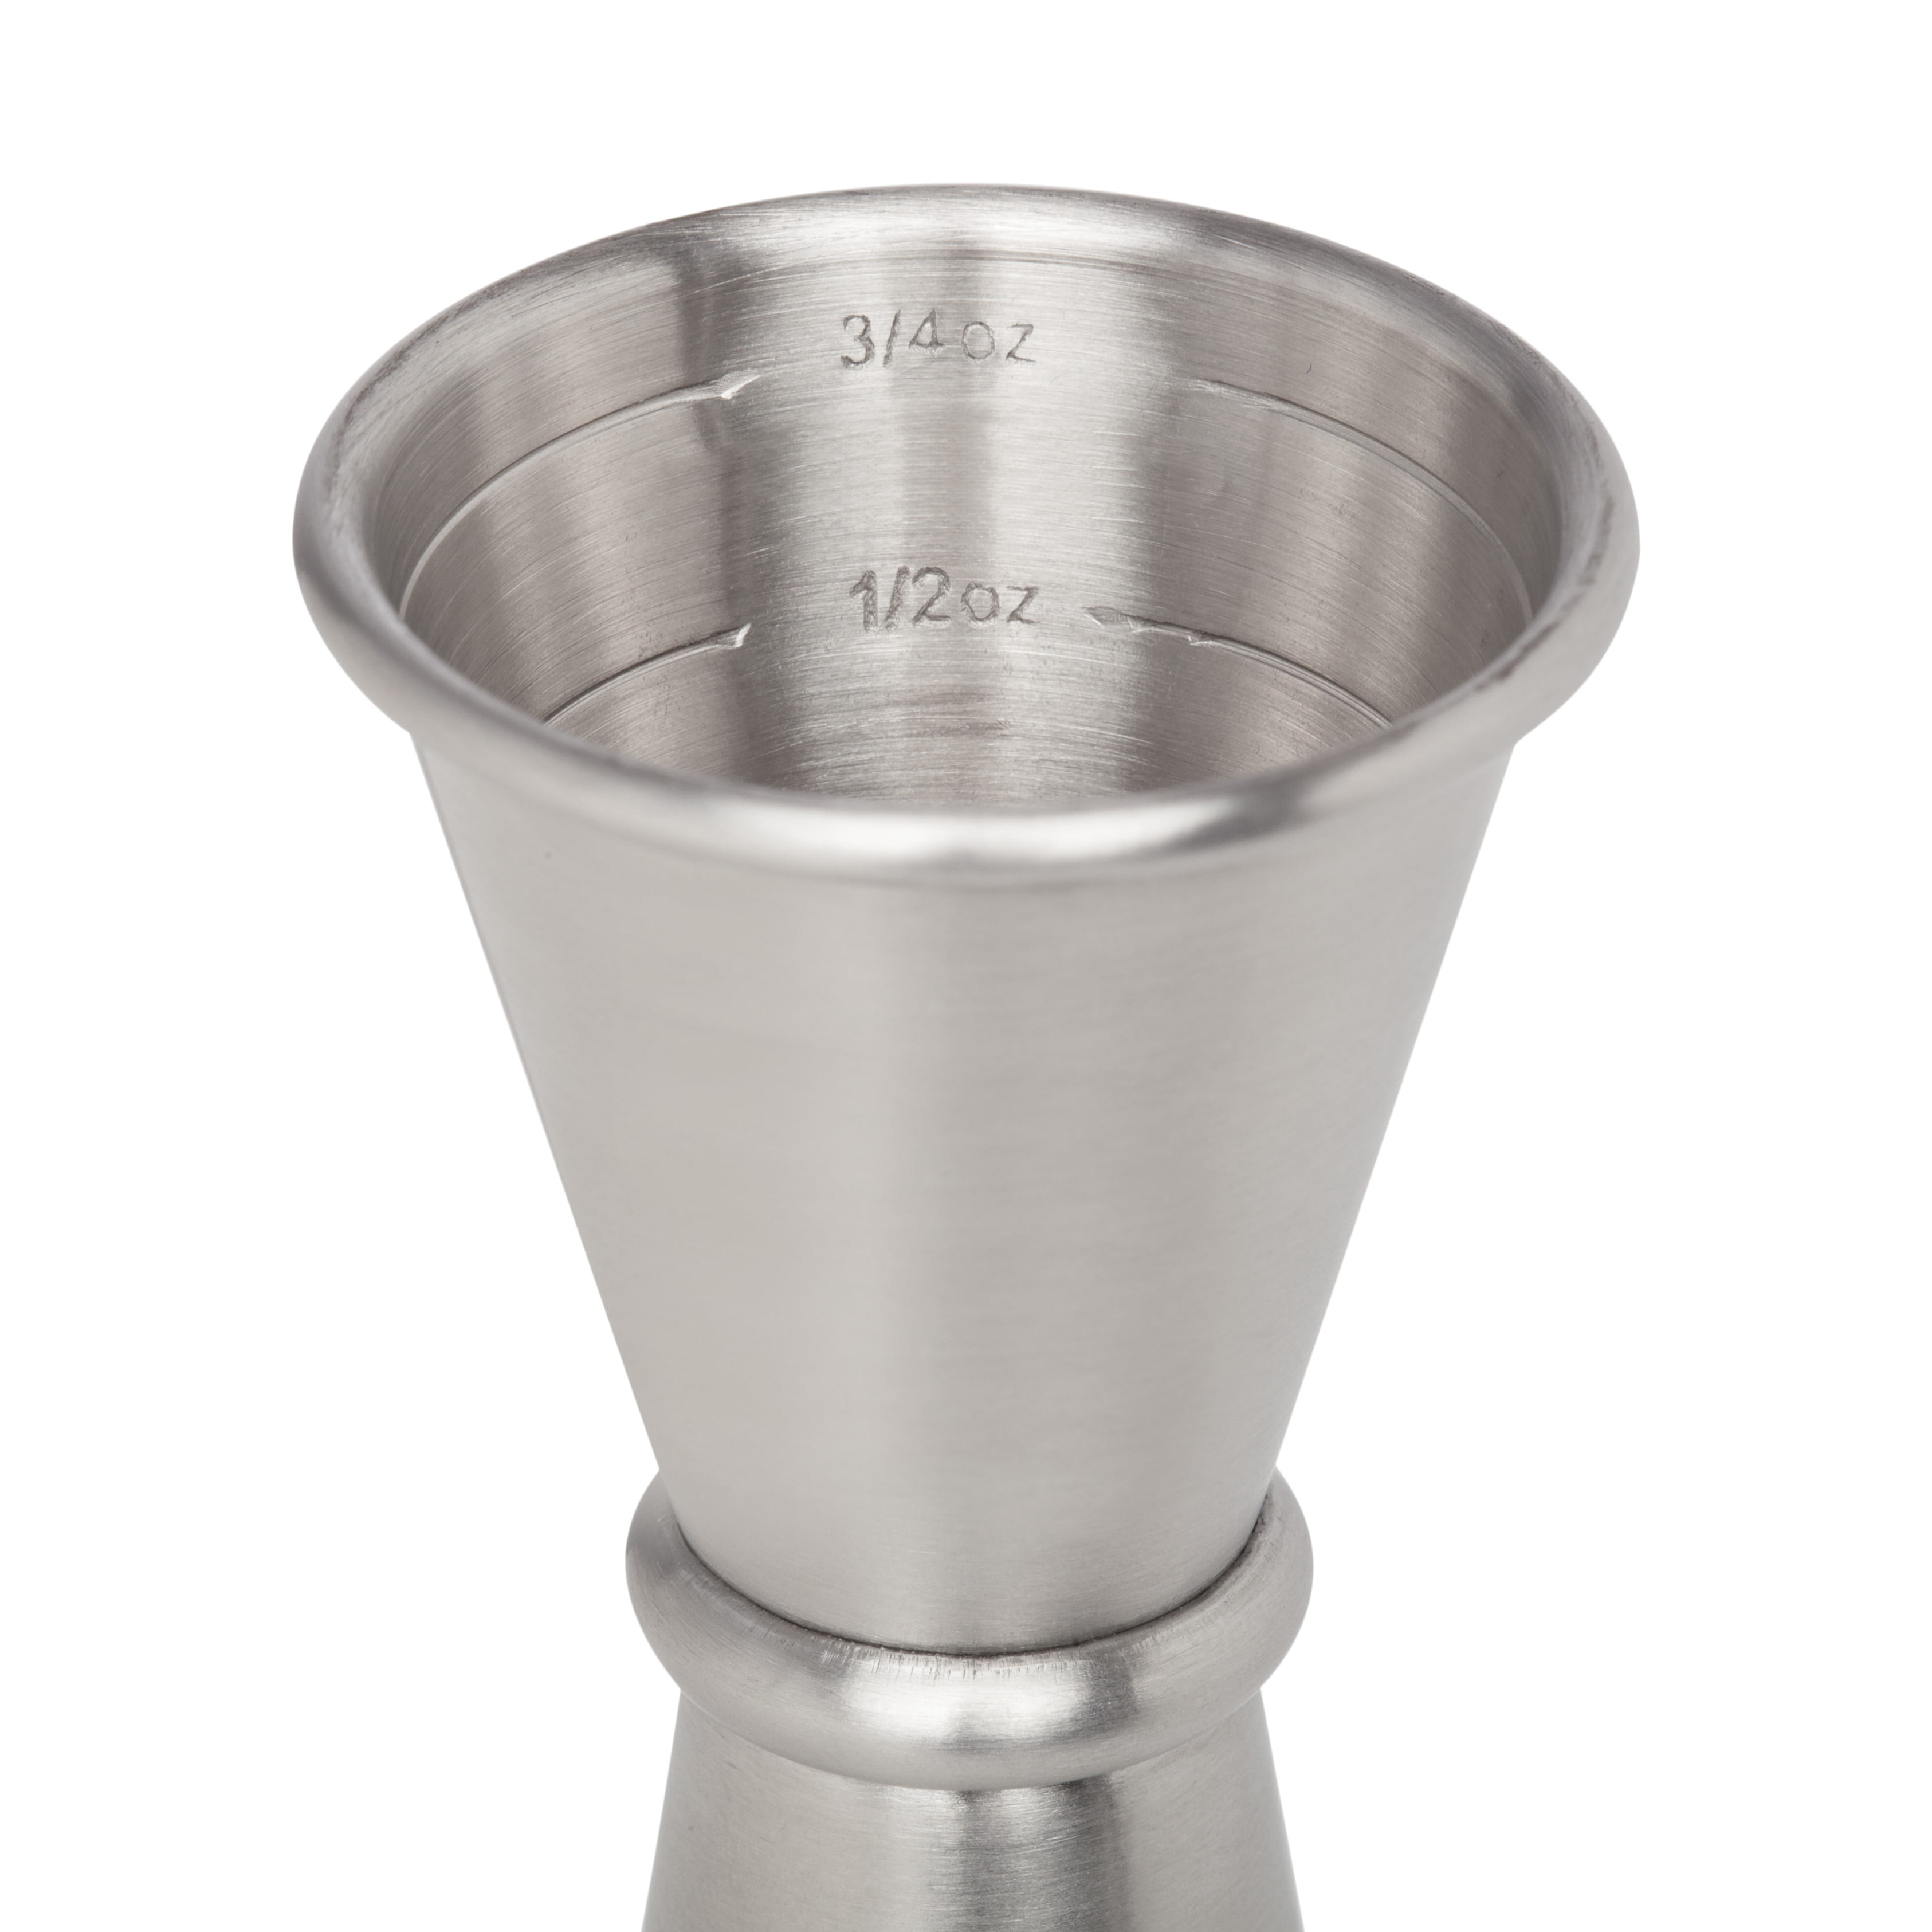 Yaomiao 18 Pieces Jigger for Bartending Double Cocktail Jigger Japanese  Jigger 2 oz 1 oz Stainless Steel Measuring Cup for Home Bar Liquor Whiskey